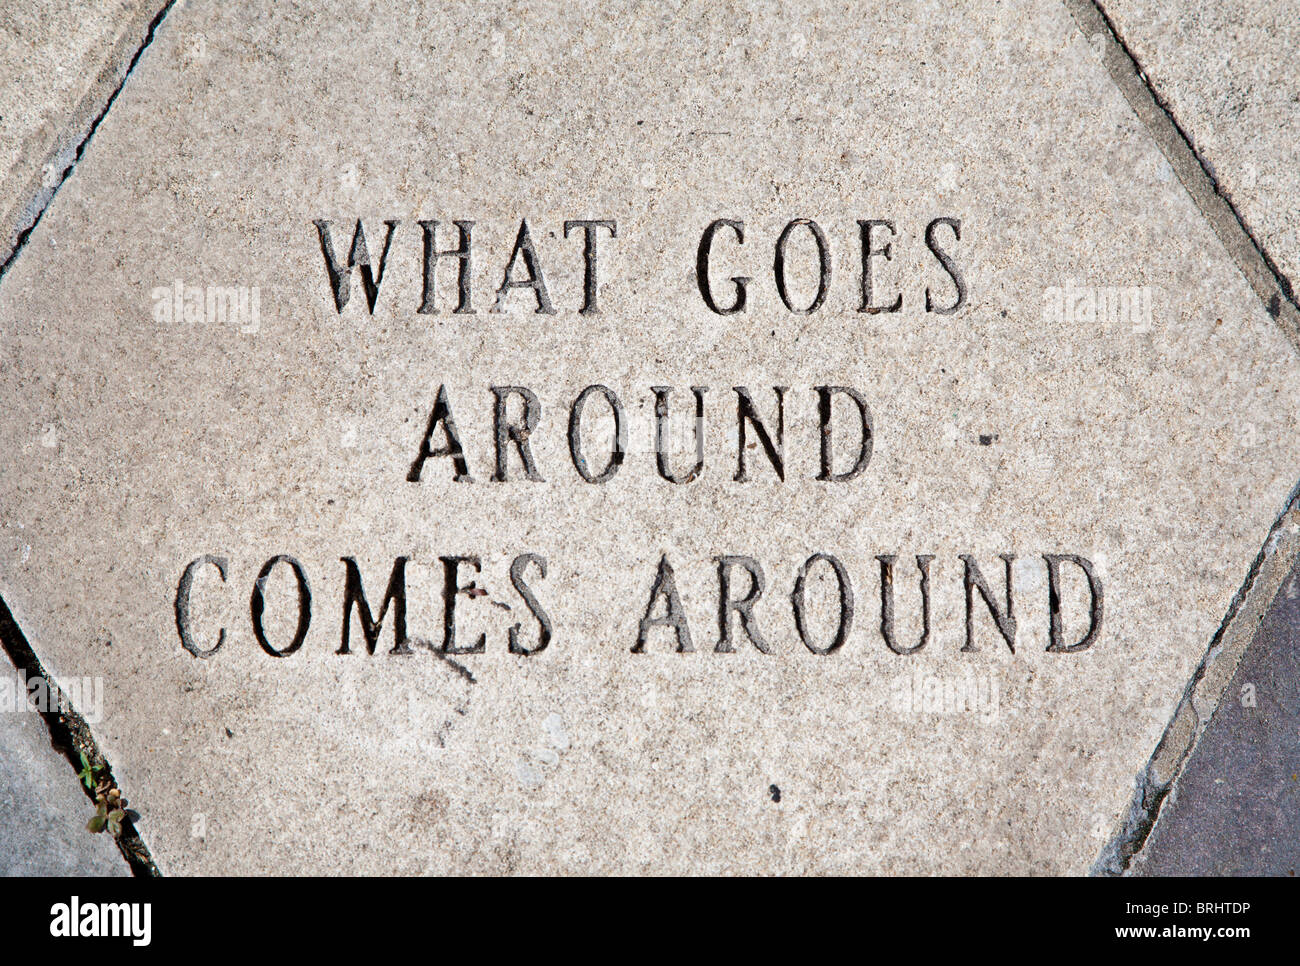 Concrete paver in sidewalk states 'What goes around, comes around' in Ybor City area of Tampa, Florida Stock Photo